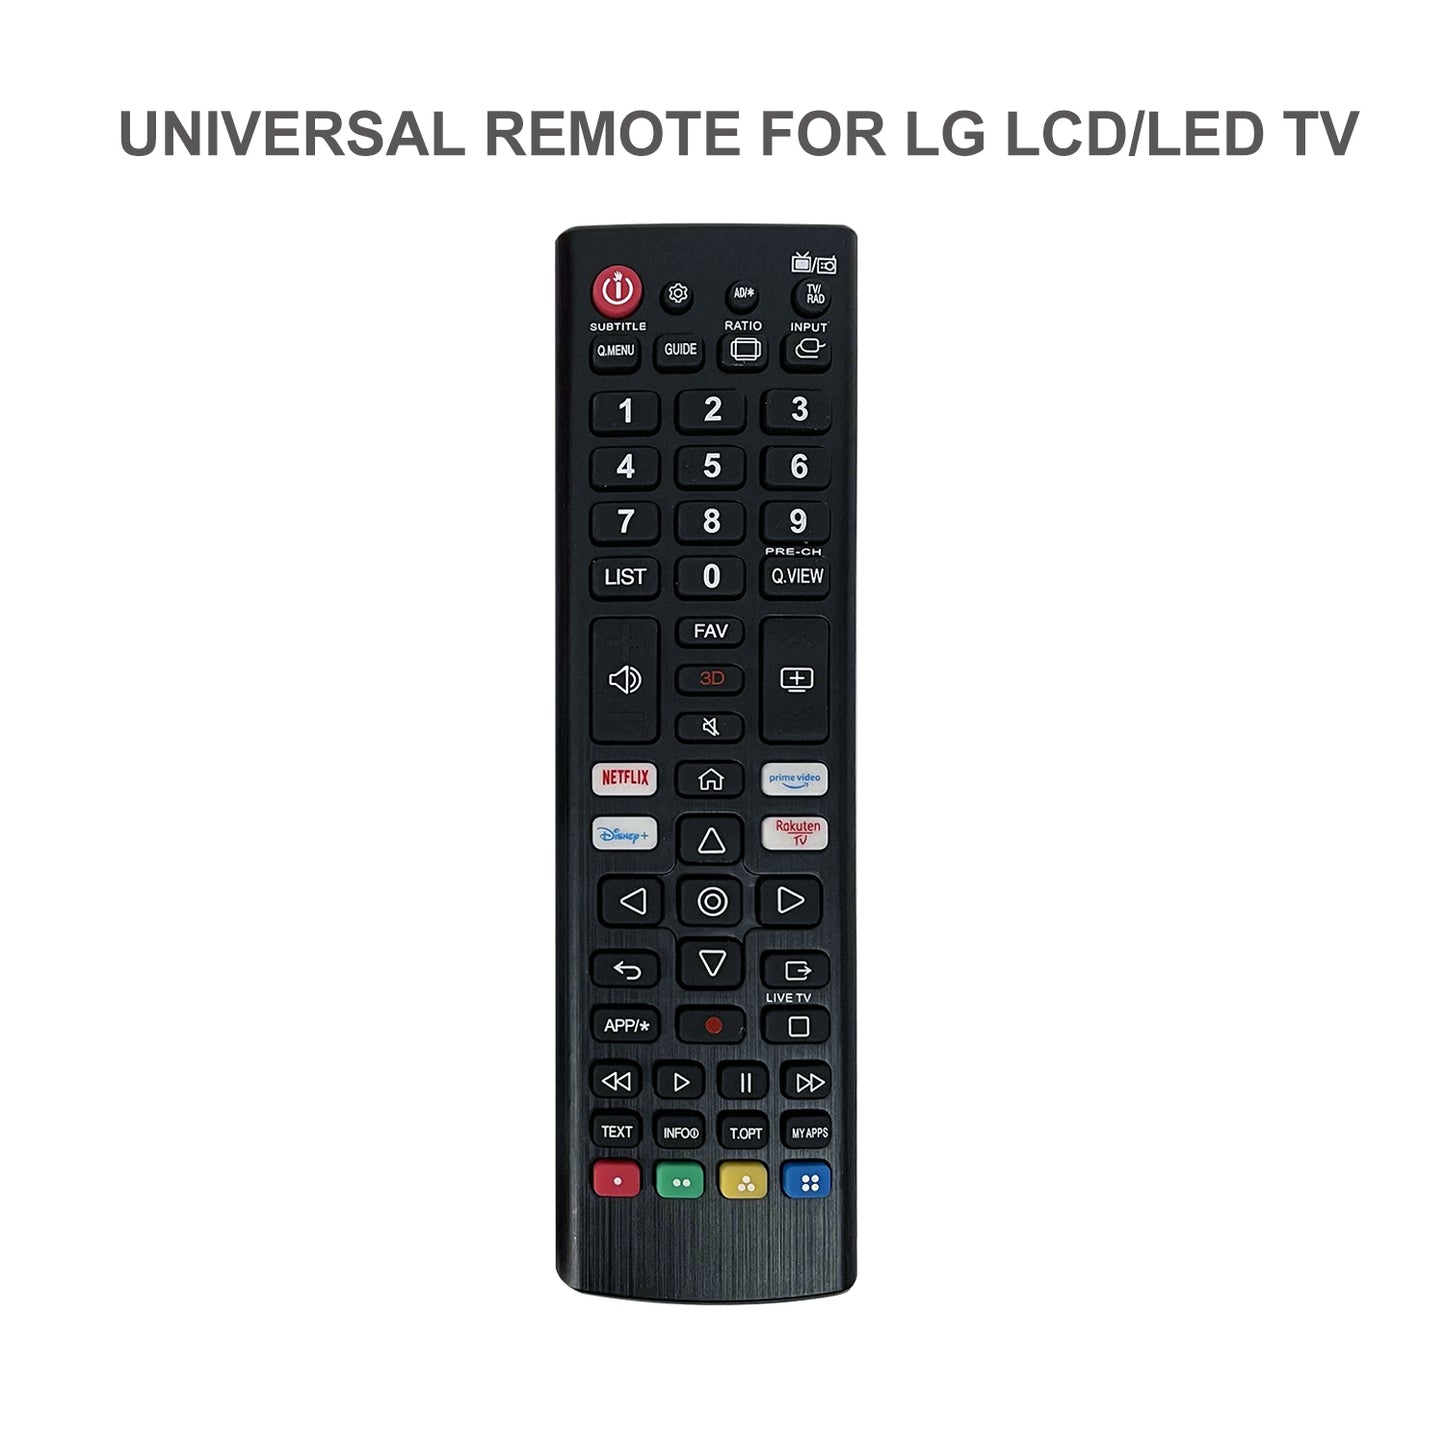 L1379V TV Replacement Remote Control For LG LCD LED HDTV 3D TV, AKB75095307 And More.